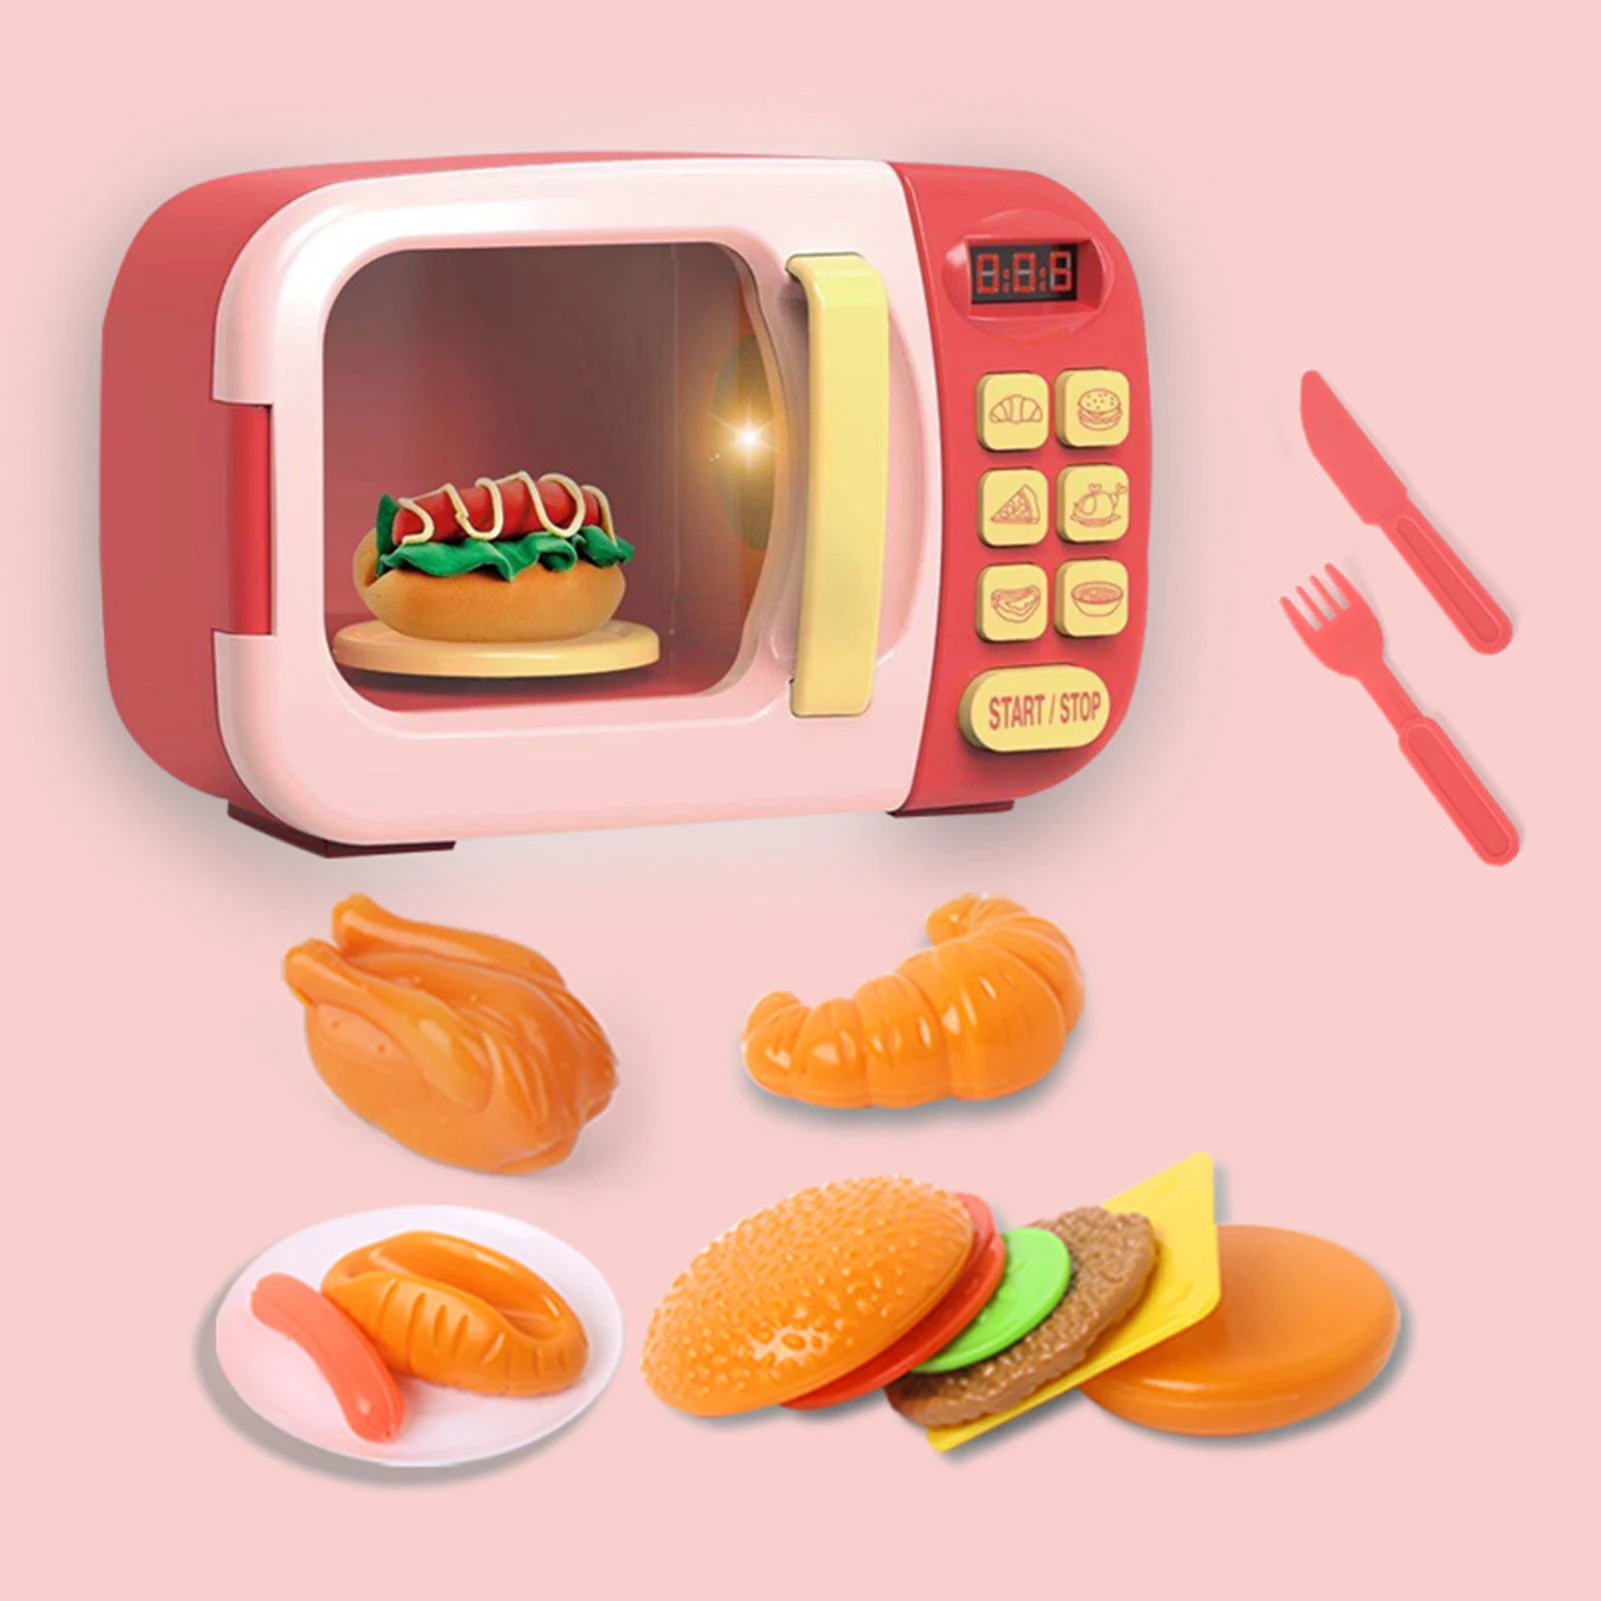 https://ae01.alicdn.com/kf/Hcf3d2bf4d7d34ebc80ecf07e9fccb035N/Creative-Microwave-Oven-Simulation-Model-Toy-Timing-Playing-Dollhouse-Interactive-Pretend-Play-Game-Doll-Kitchen-Toys.jpg